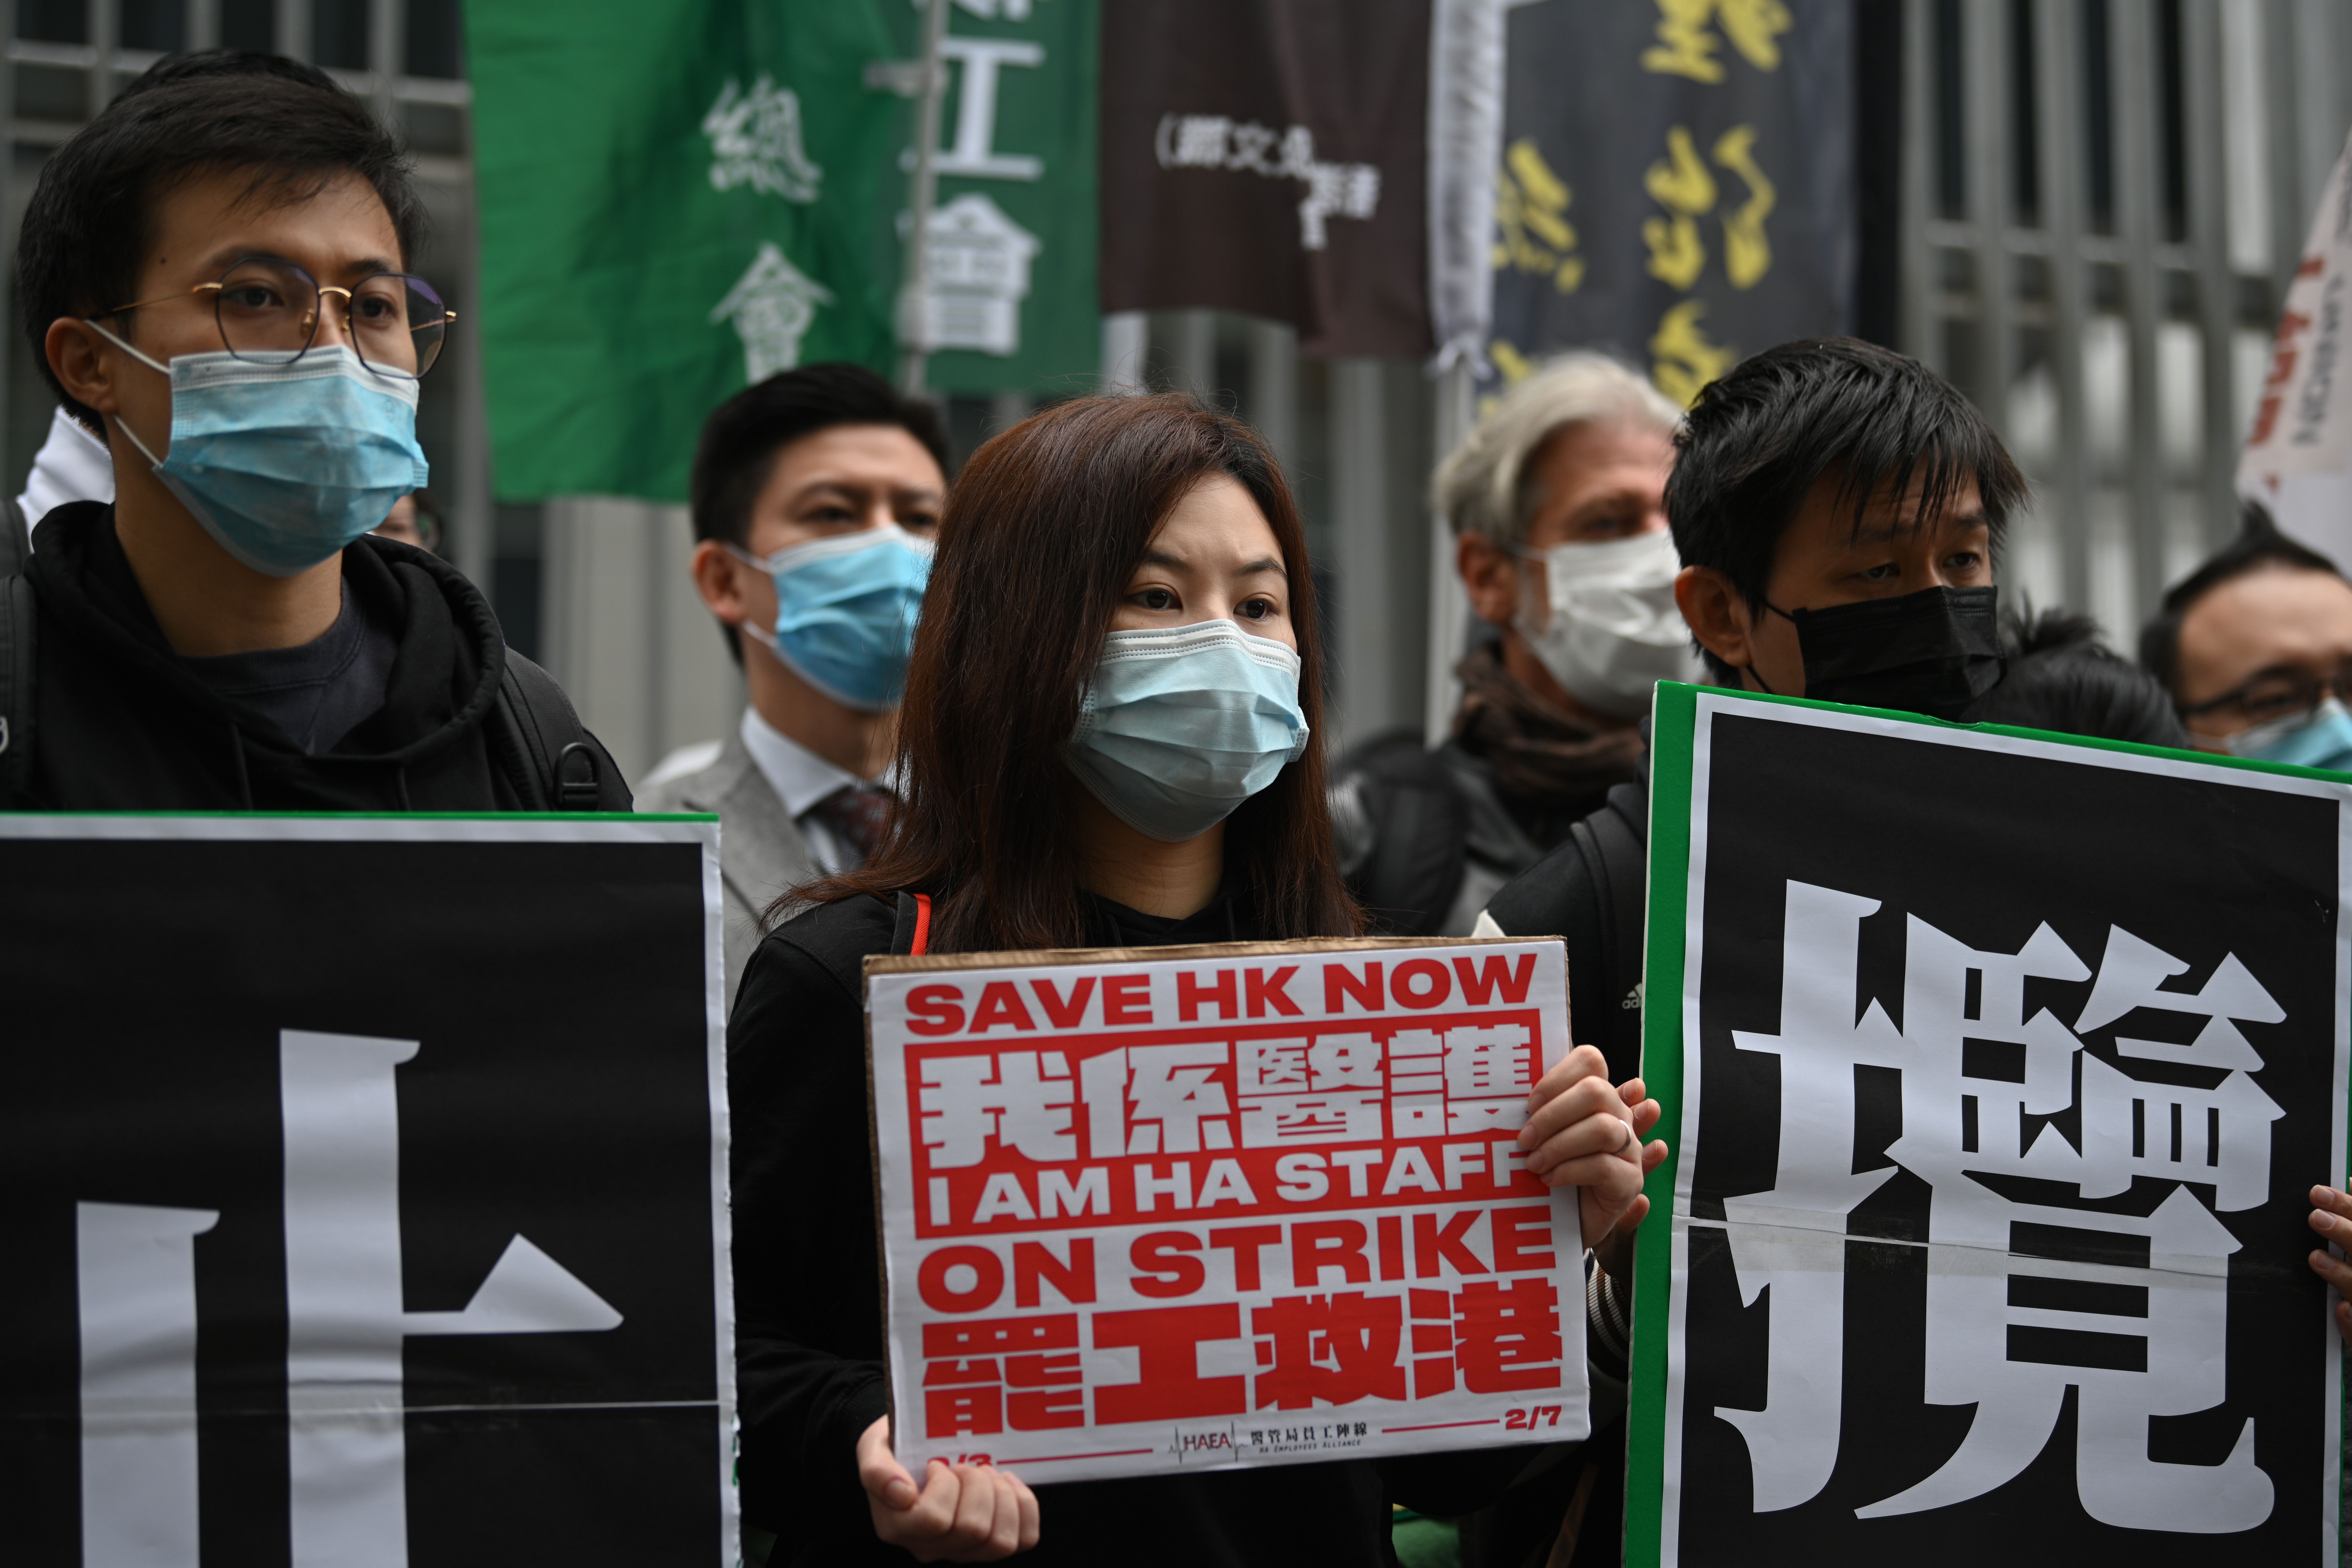 Members of the Hospital Authority Employees Alliance on strike in Hong Kong on February 5, 2020.